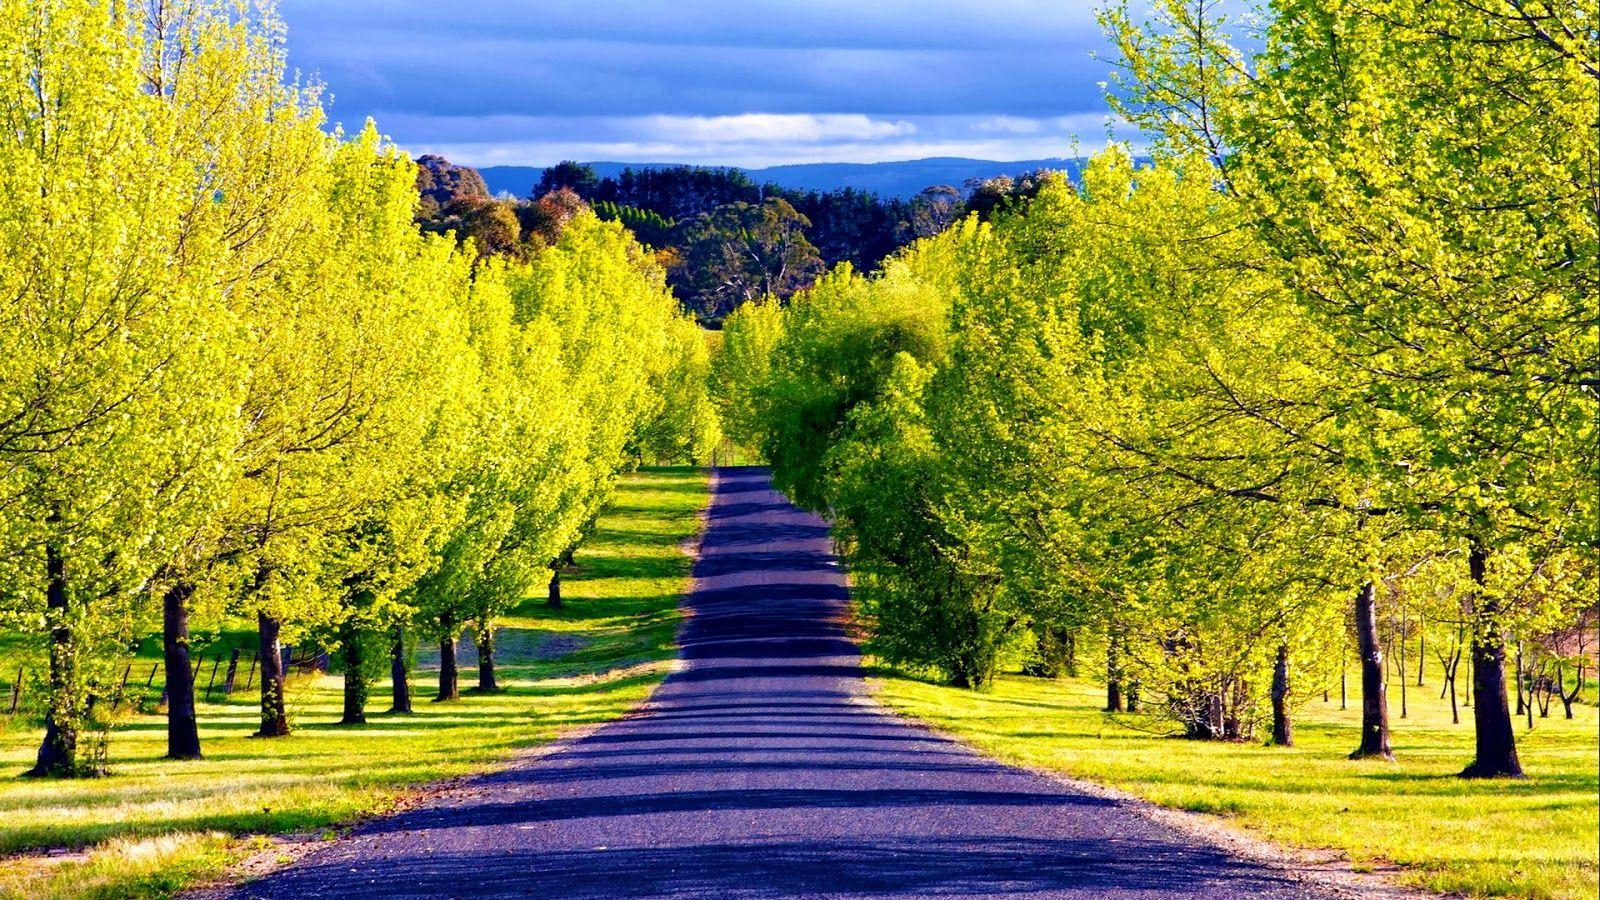 Most Beautiful Scenic Wallpaper. Pathway Wallpaper most